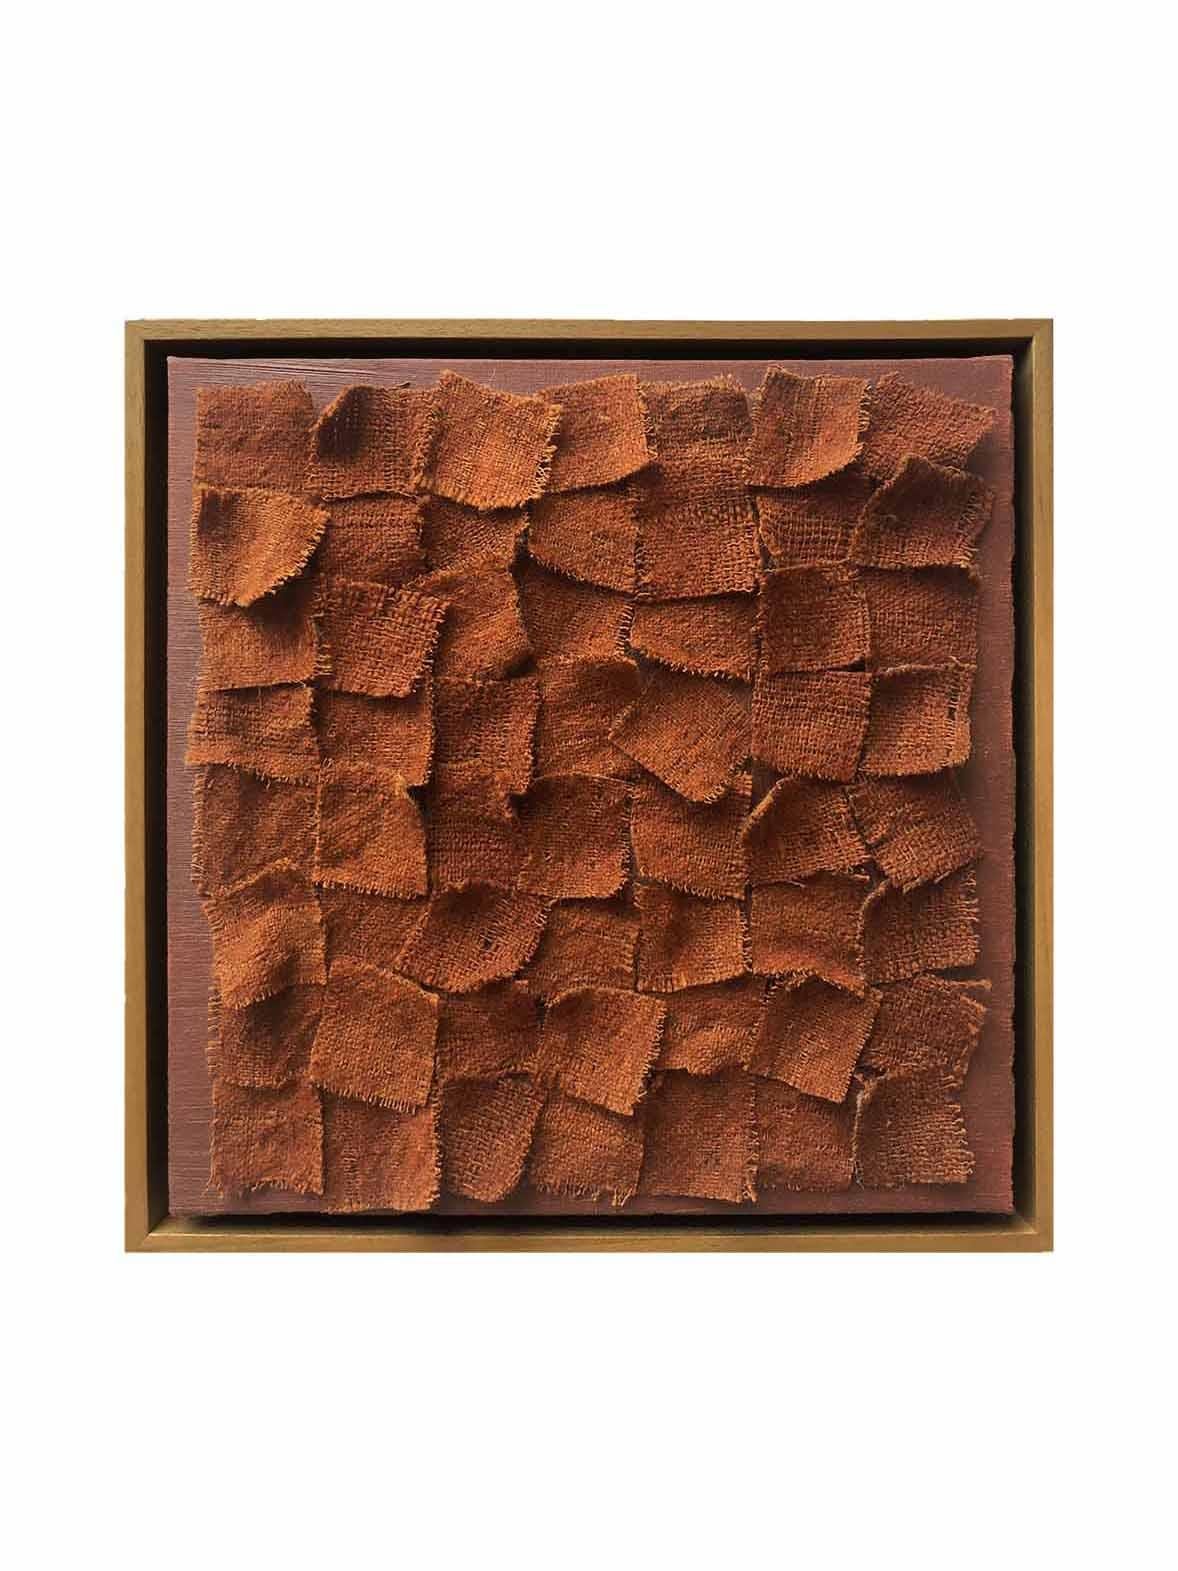 Hand-Crafted Brown Textile artwork Wall Piece, Made of handwoven Wool and Natural Dyes For Sale